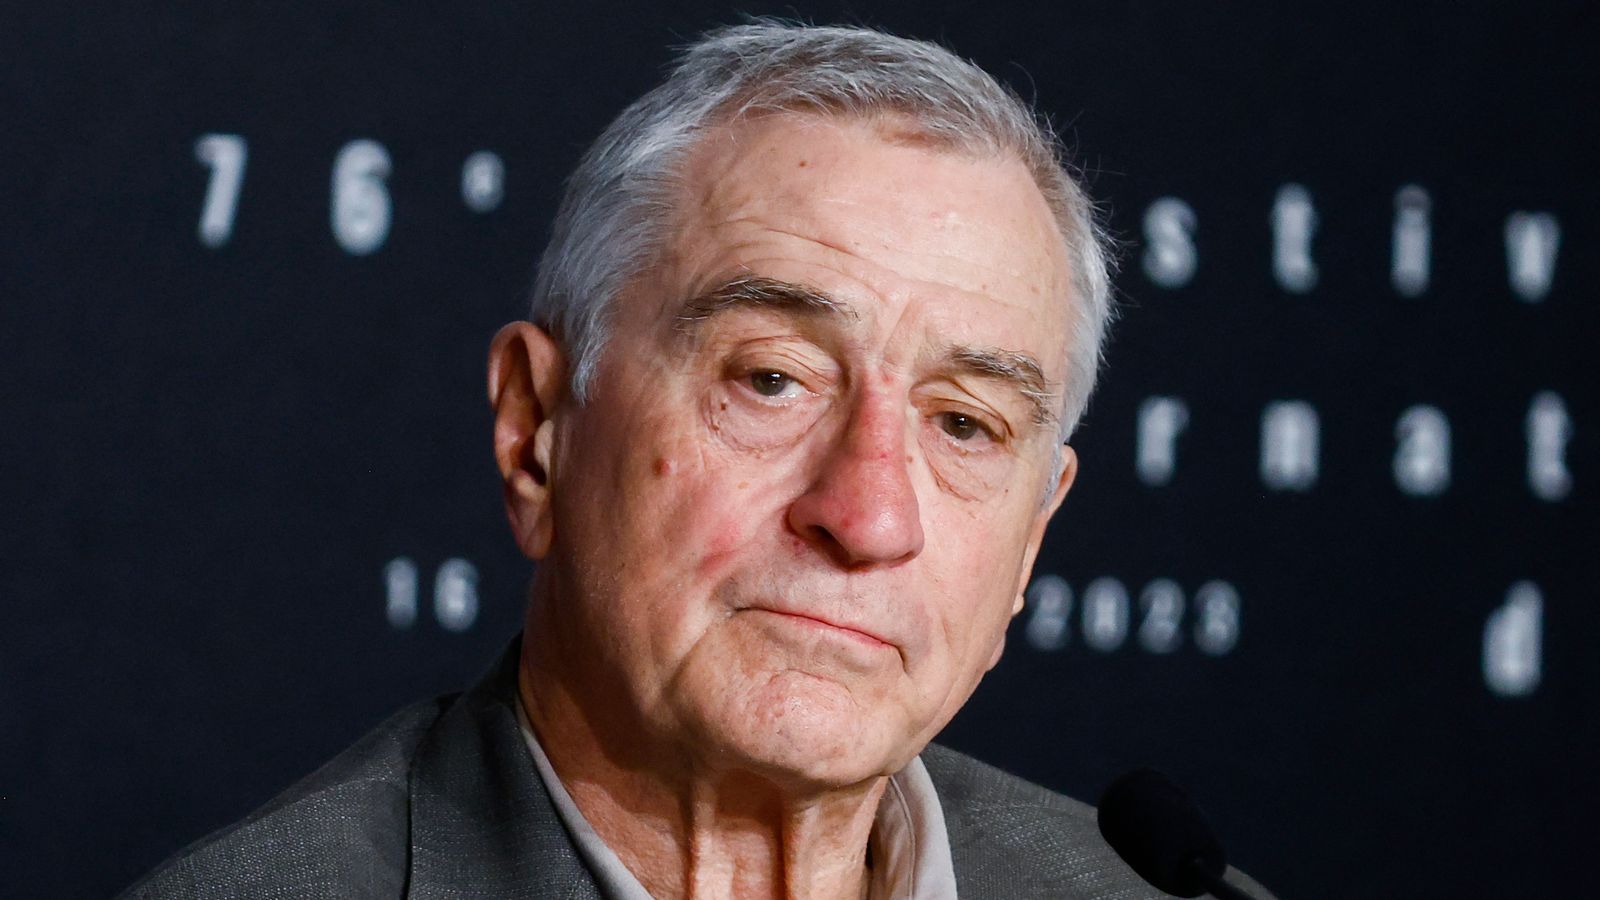 Robert De Niro shouts 'shame on you' across court in ex-assistant's abuse case